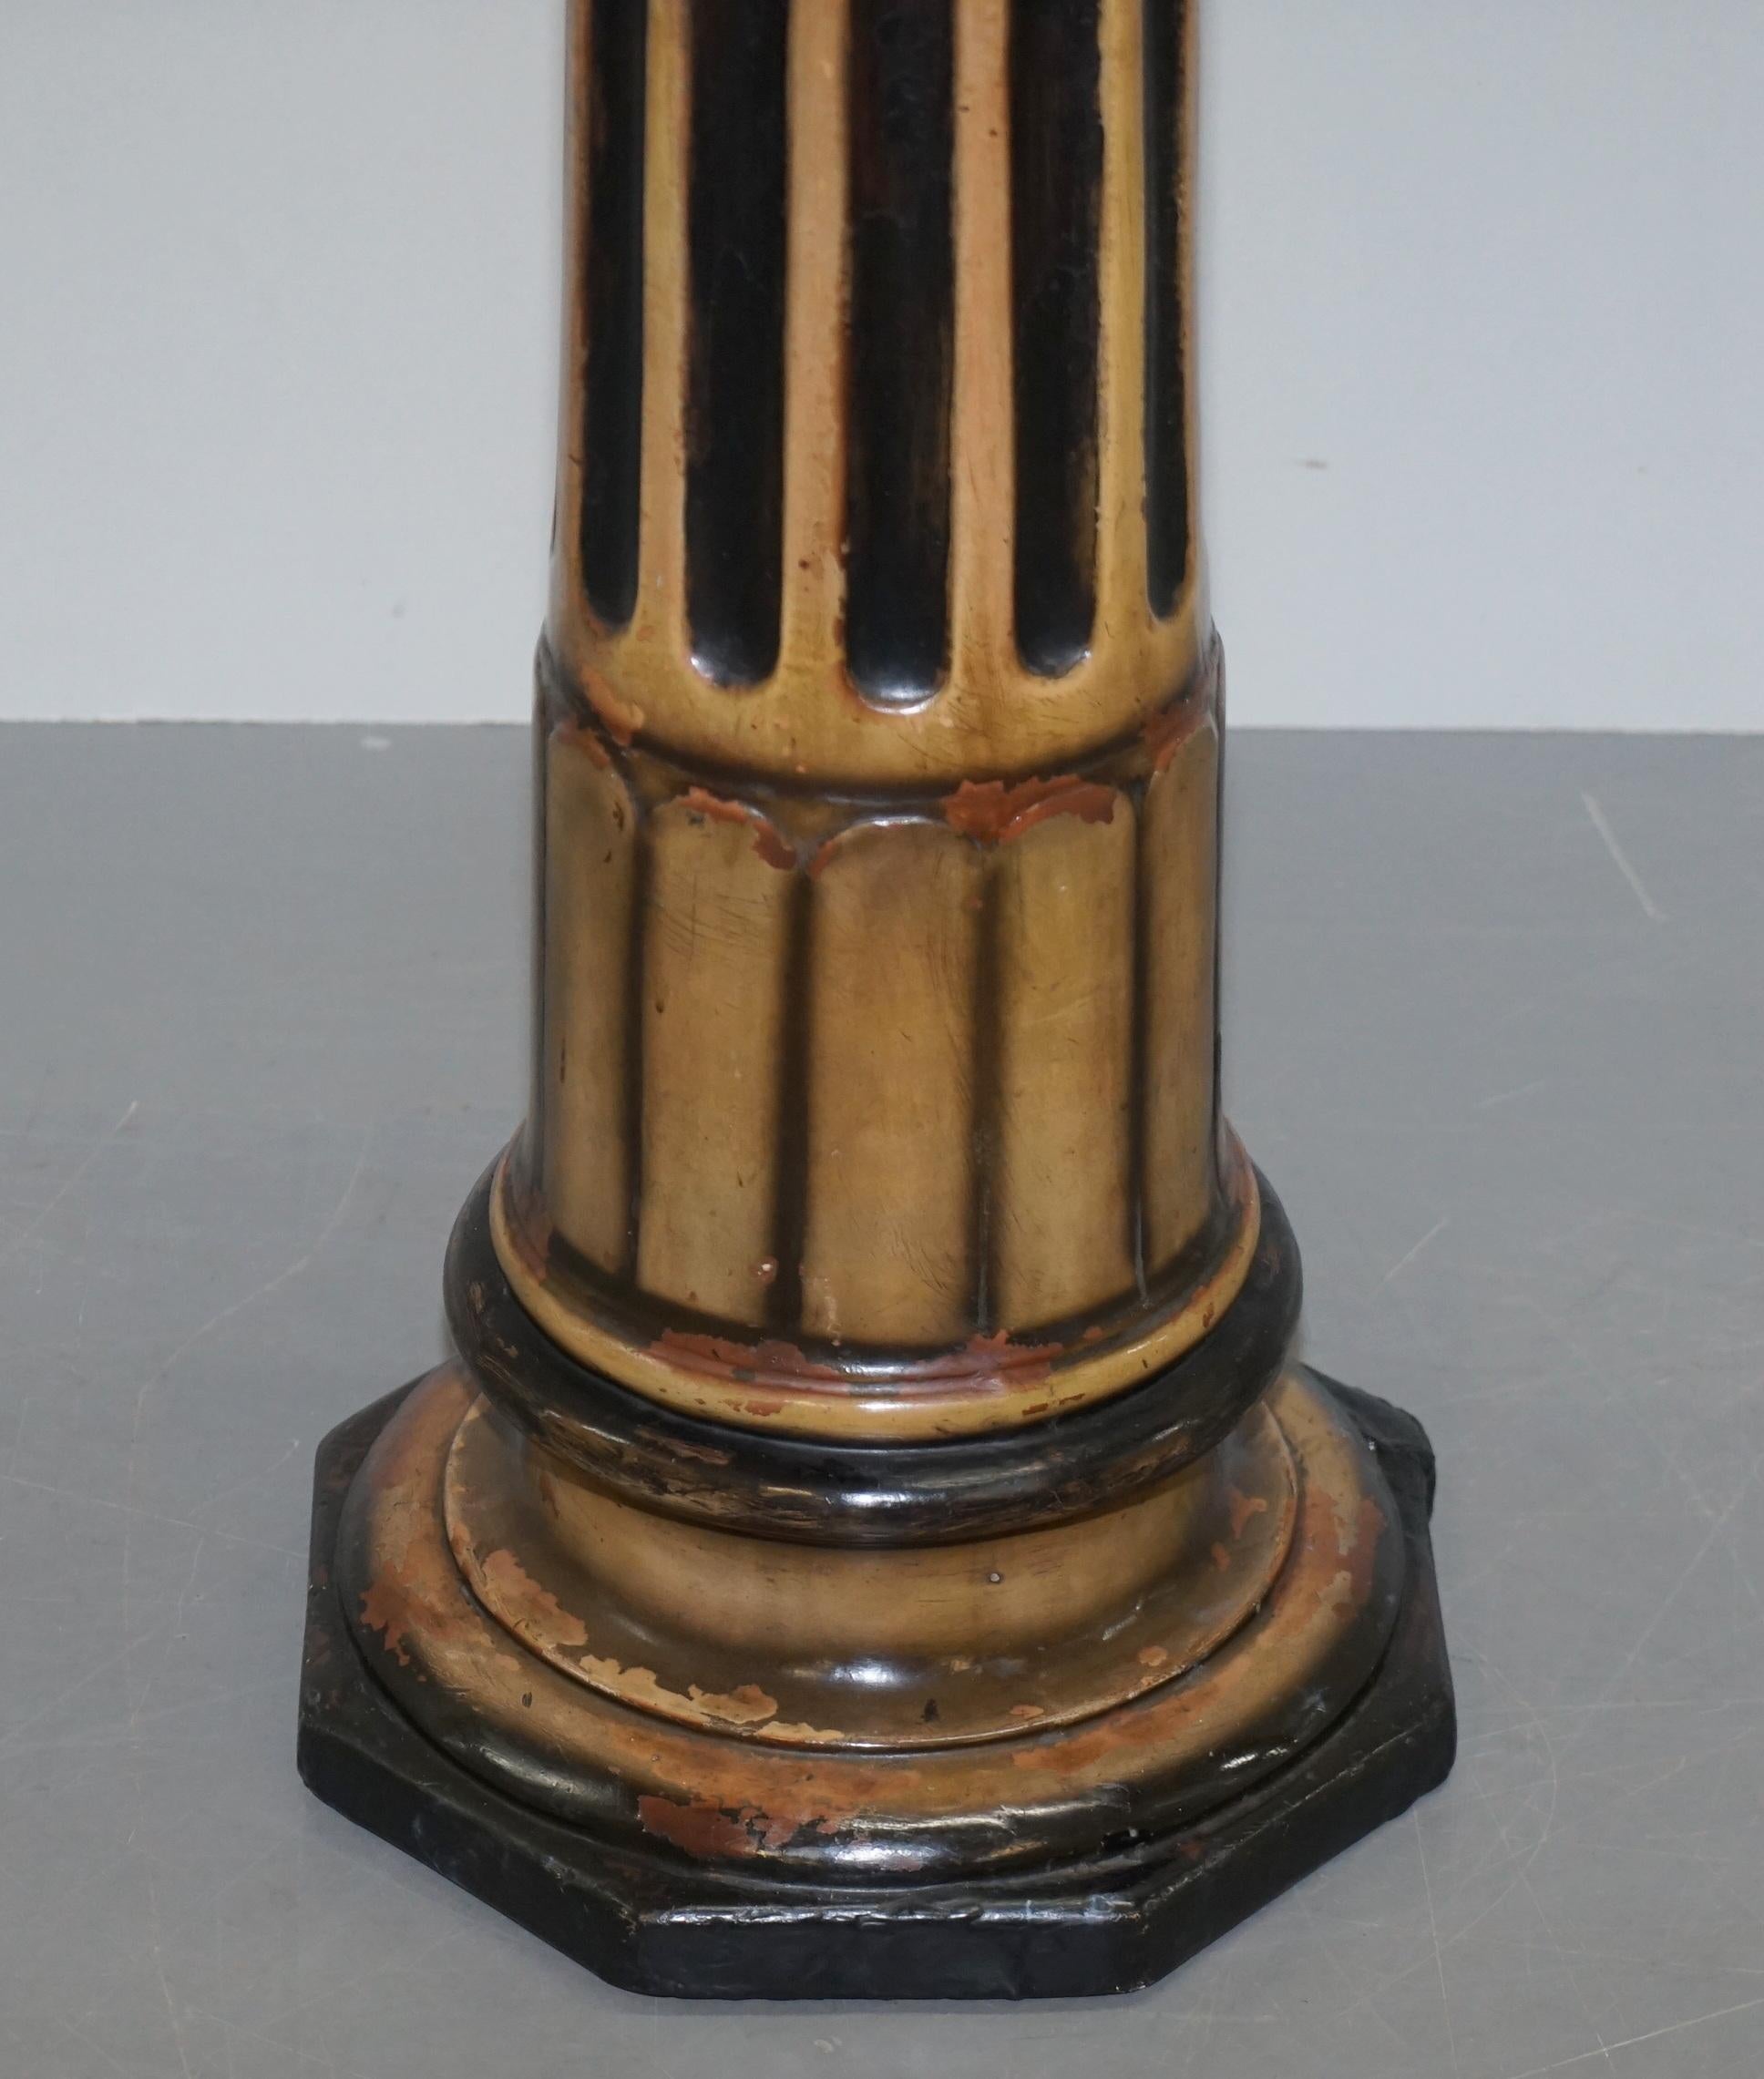 We are delighted to offer for sale this lovely pottery stone Victorian Corinthian pillar pedestal stand

A very good looking well made and decorative pillar, the finish is original and distressed, I absolutely love it

Dimensions

Height